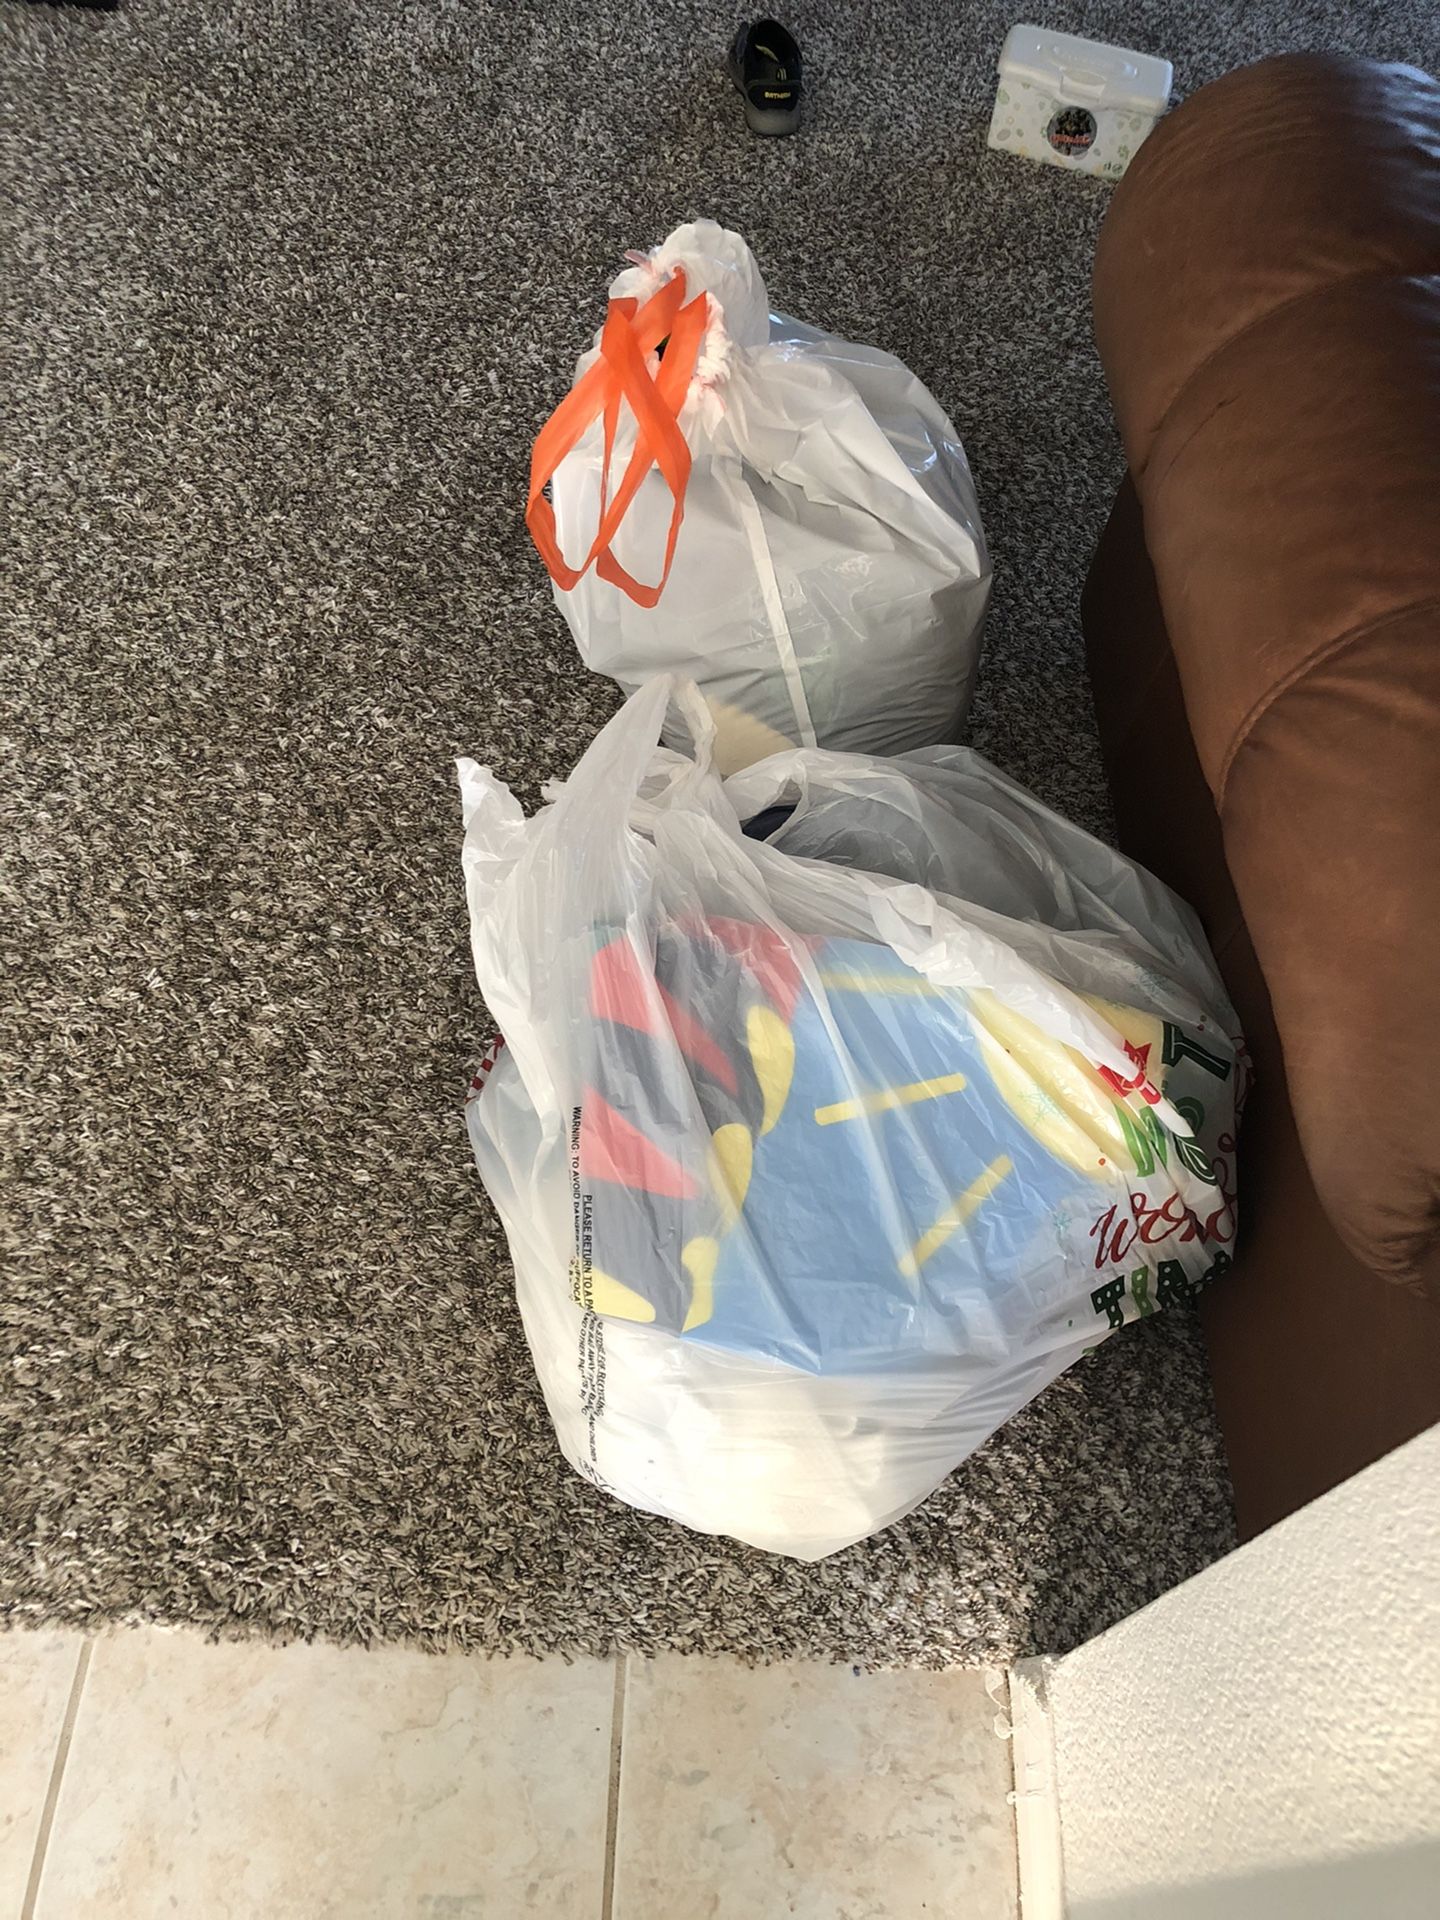 Two large bags filled with women’s stuff